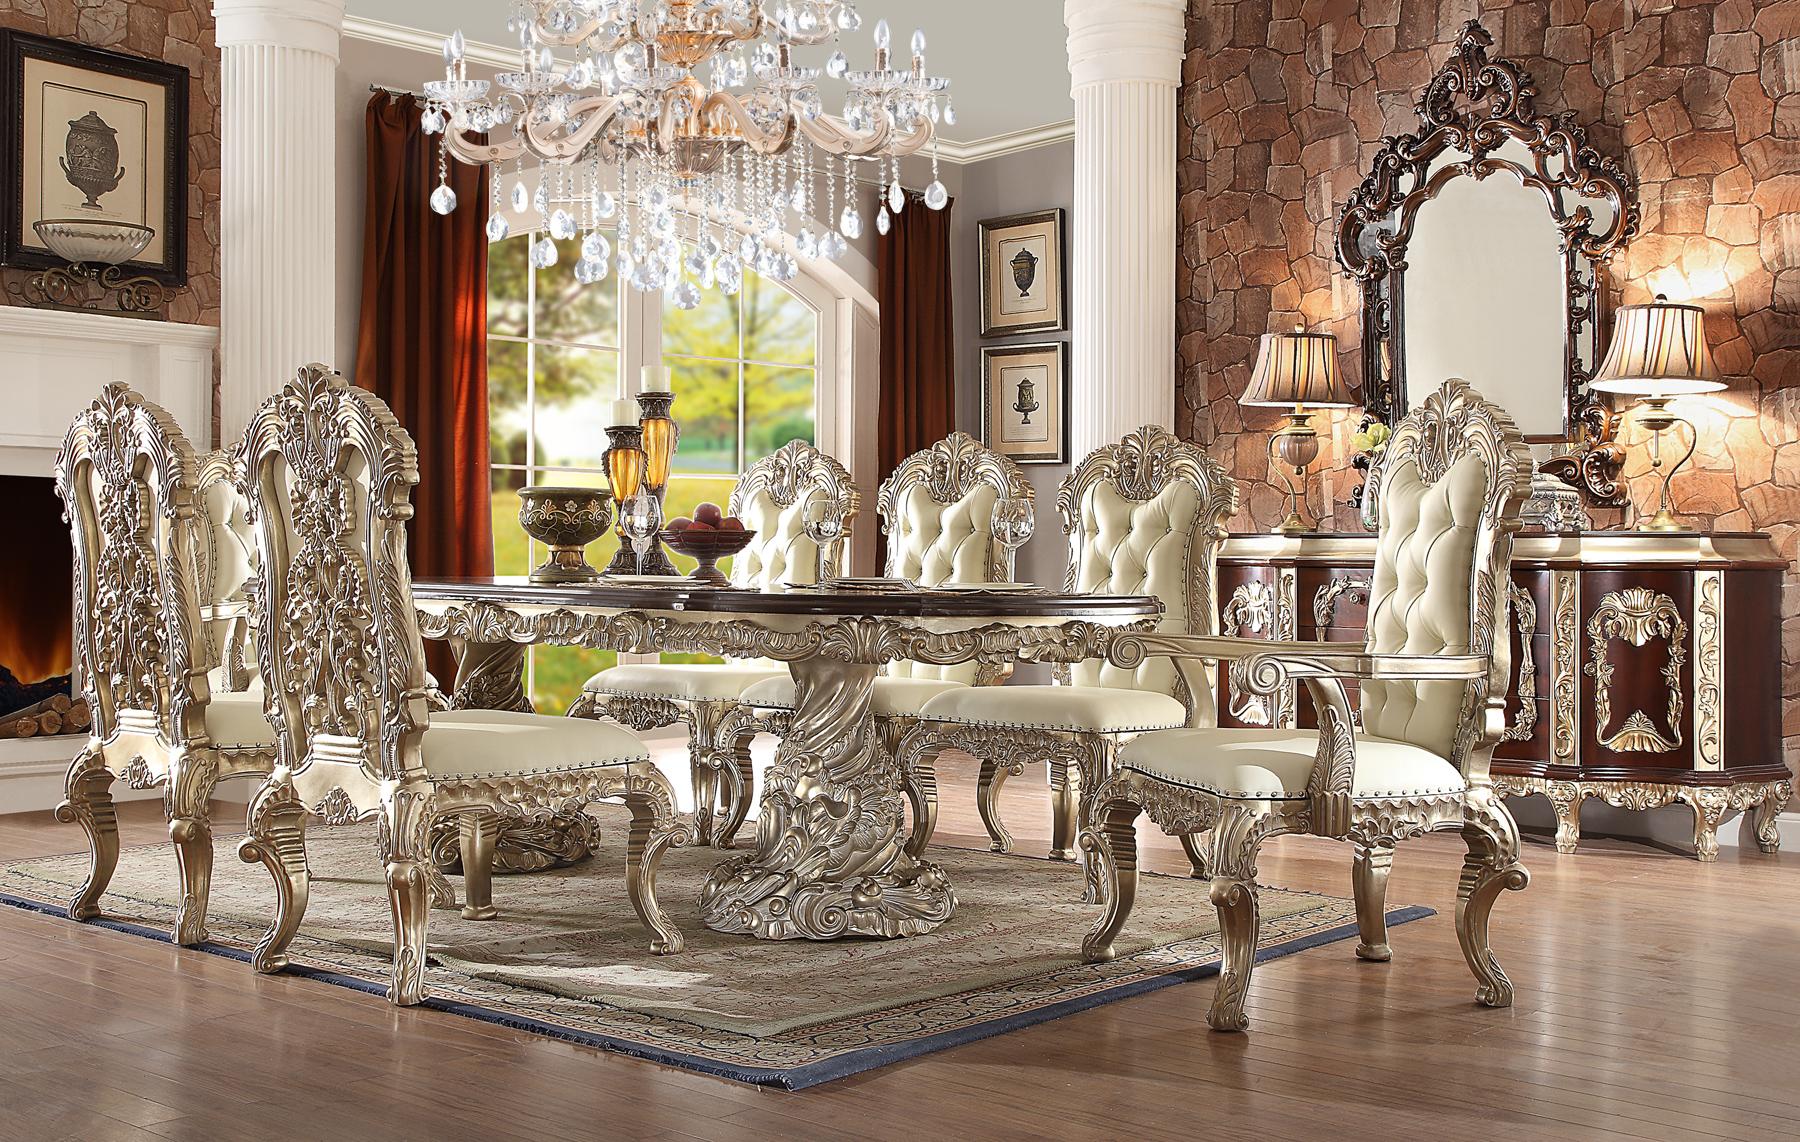 Traditional Dining Room Set HD-8017 – 9PC DINING TABLE SET HD-8017-DTSET9 in Antique White, Silver 